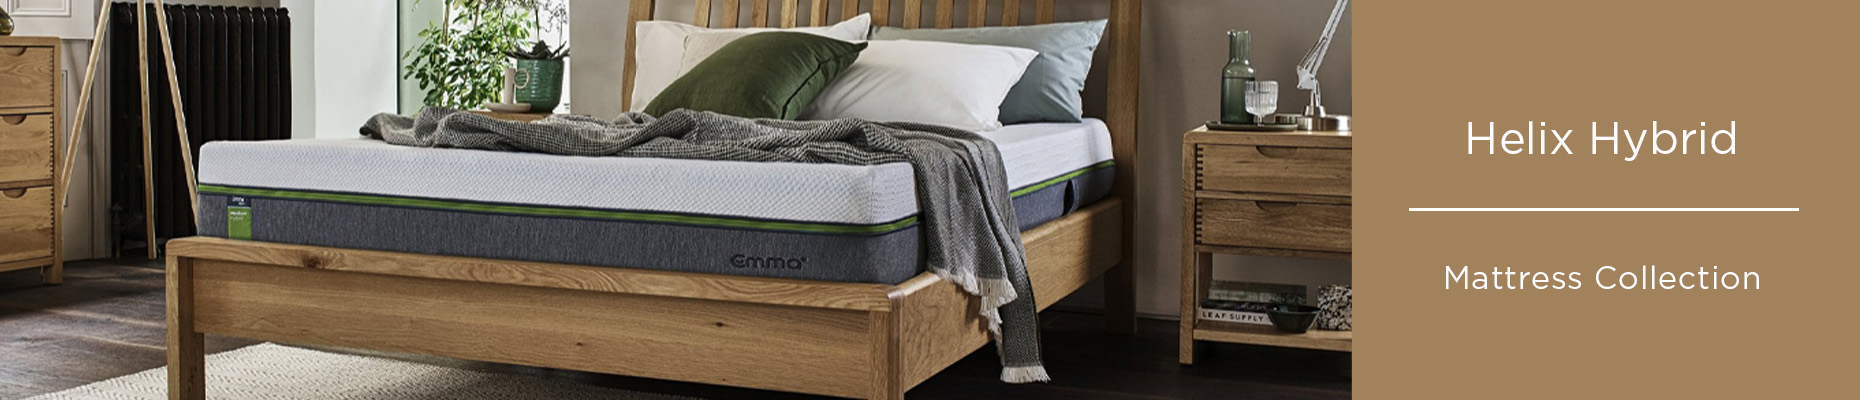 Helix Hybrid collection from Emma Sleep at Forrest Furnishing